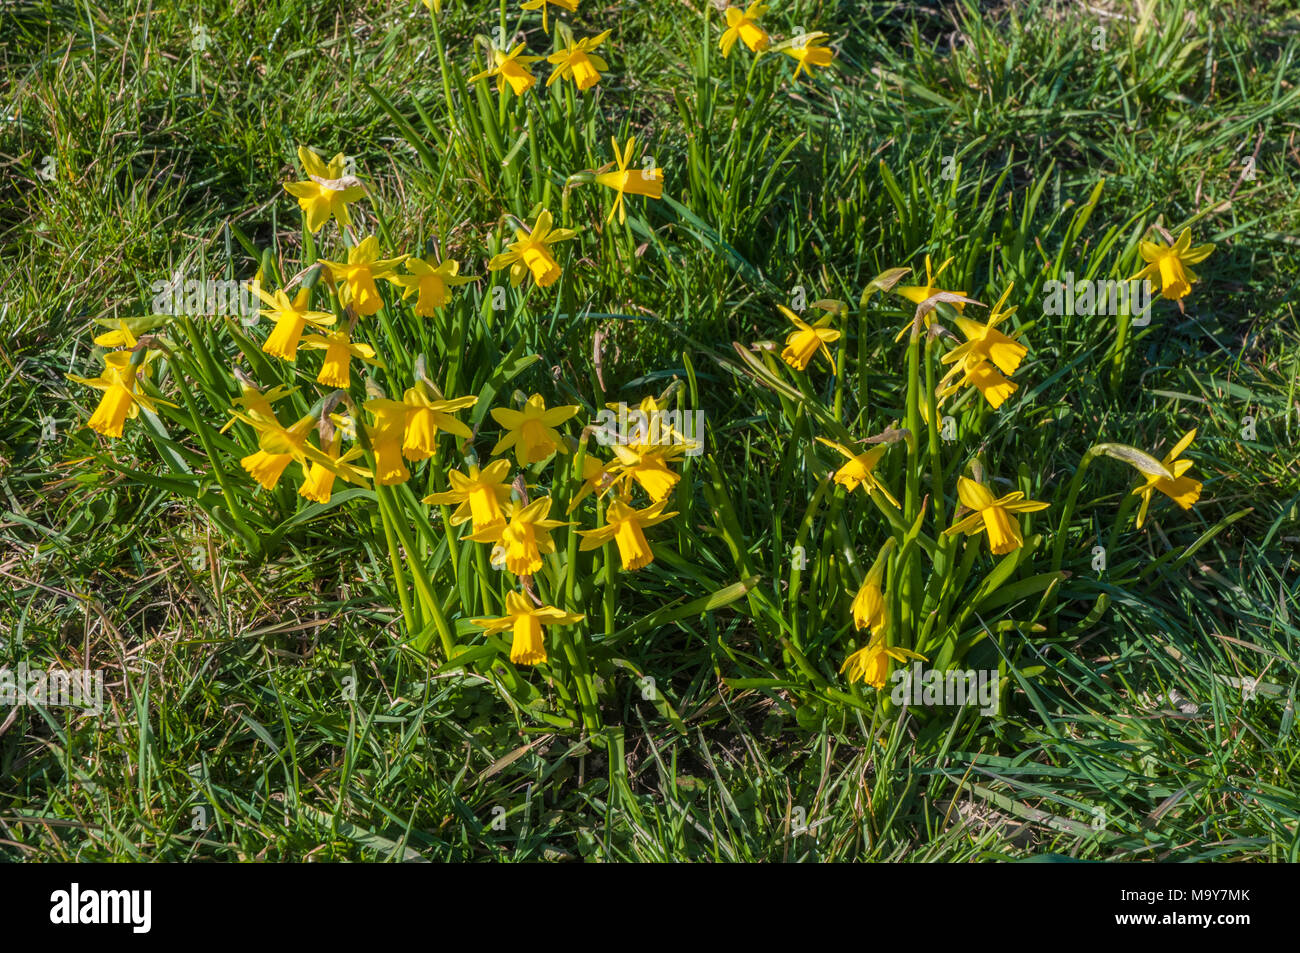 Clump of Narcissi (Daffodil) 'February Gold'.Taken in local park in Blackpool. Stock Photo